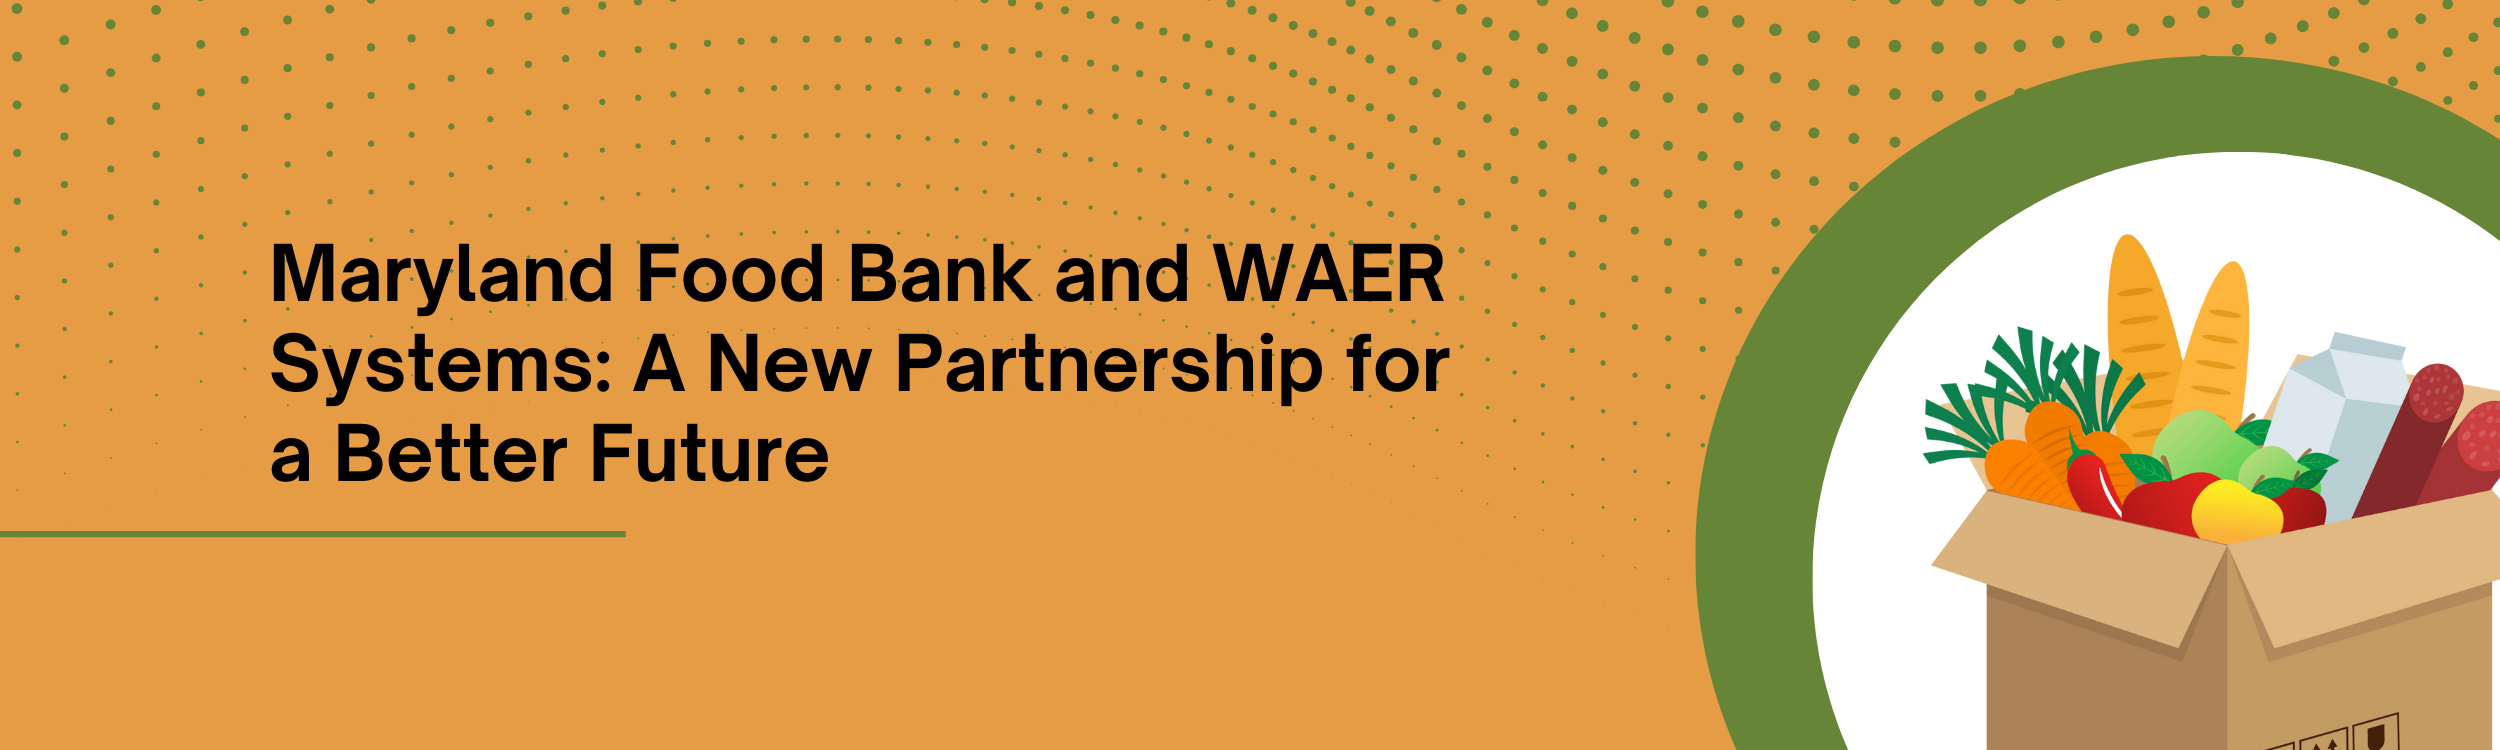 Maryland Food Bank and WAER Systems: A New Partnership for a Better Future